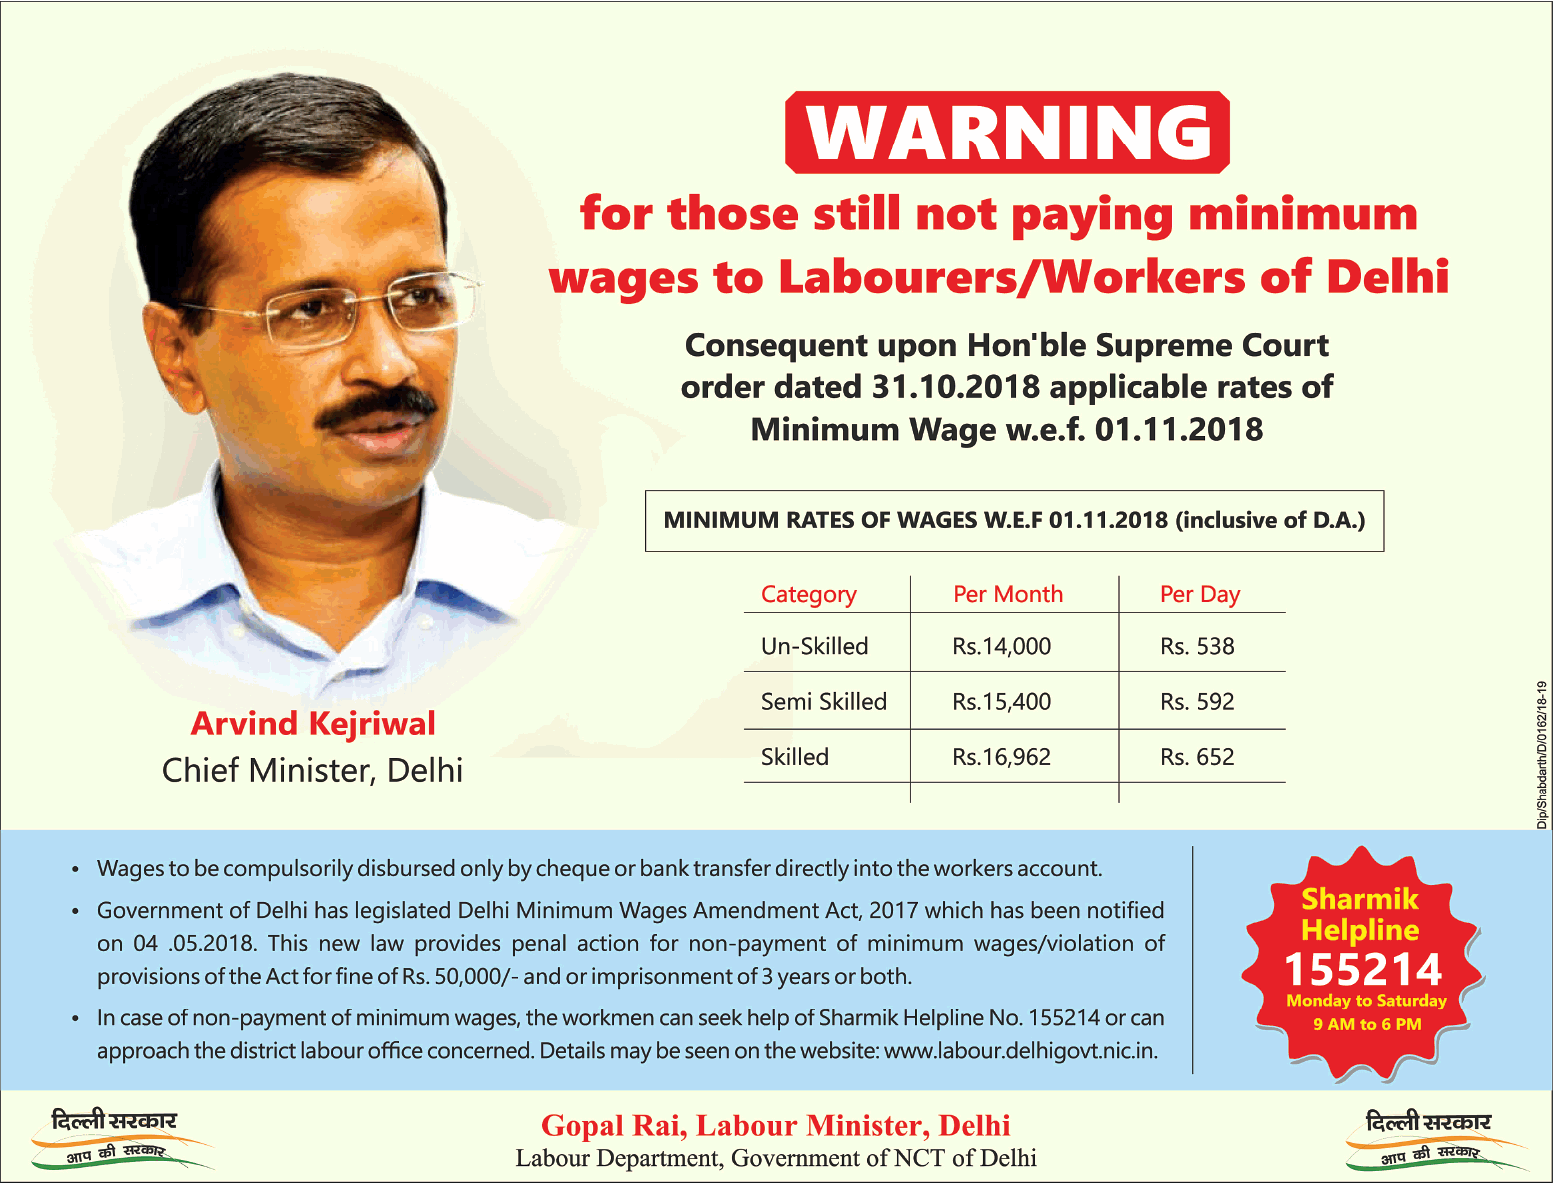 delhi-sarkar-warning-for-those-still-not-paying-minimum-wages-to-labourers-workers-of-delhi-ad-times-of-india-delhi-04-12-2018.png